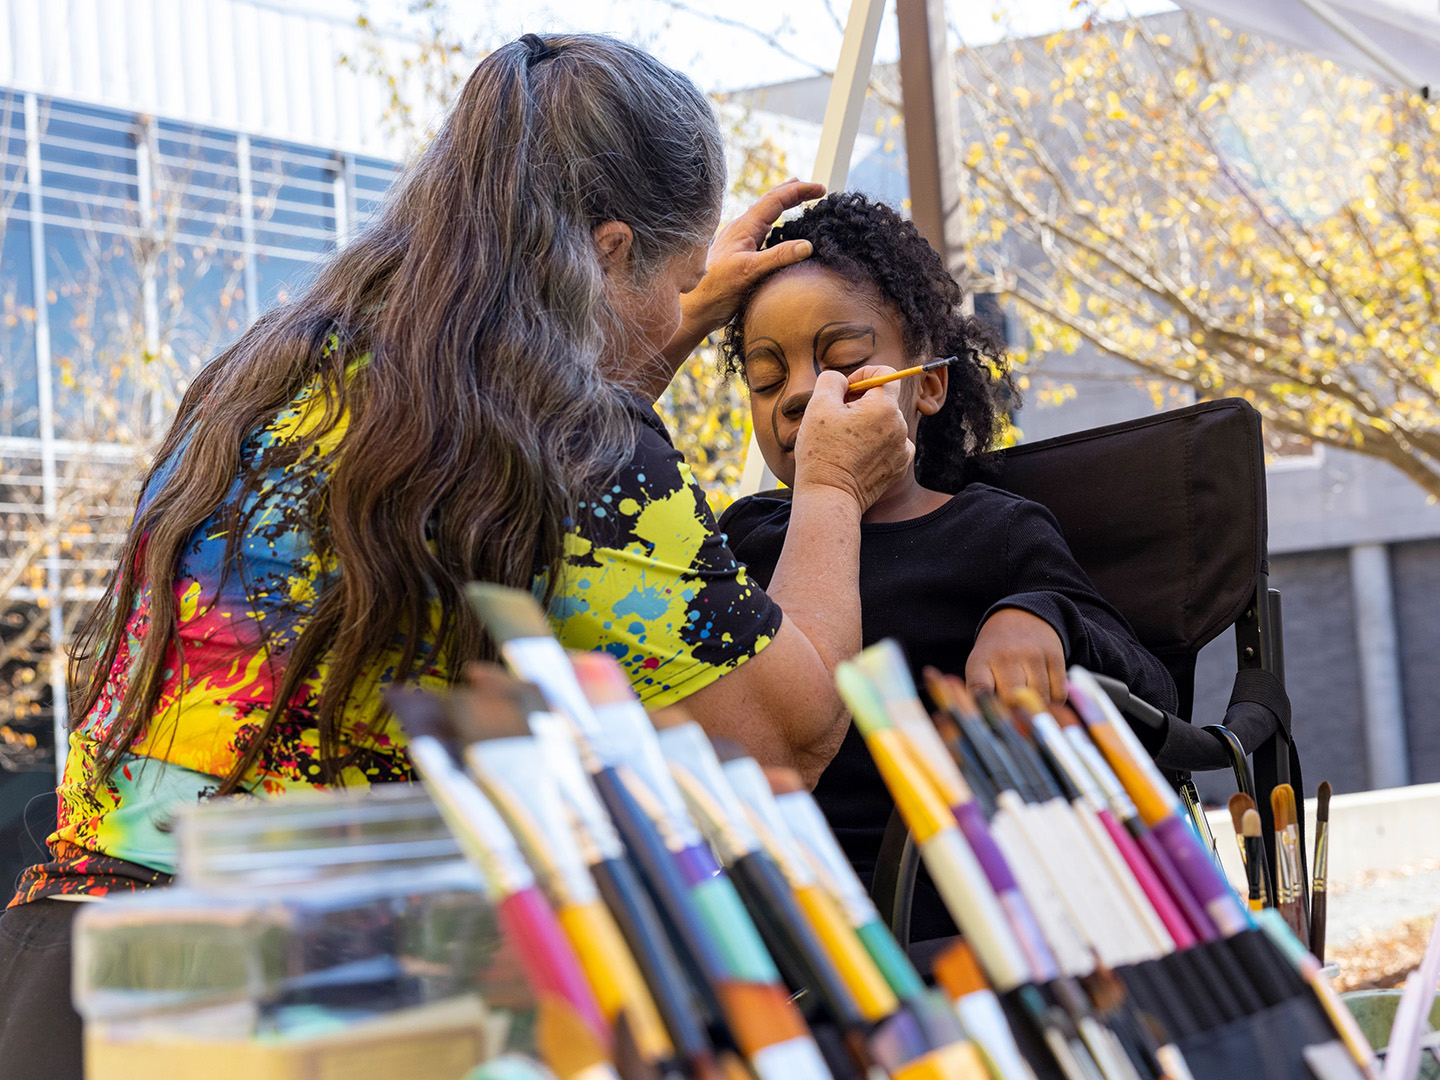 A child participates in face-painting during the Georgia Museum of Art 75th Anniversary Celebration. (Dorothy Kozlowski, University of Georgia Marketing and Communications)